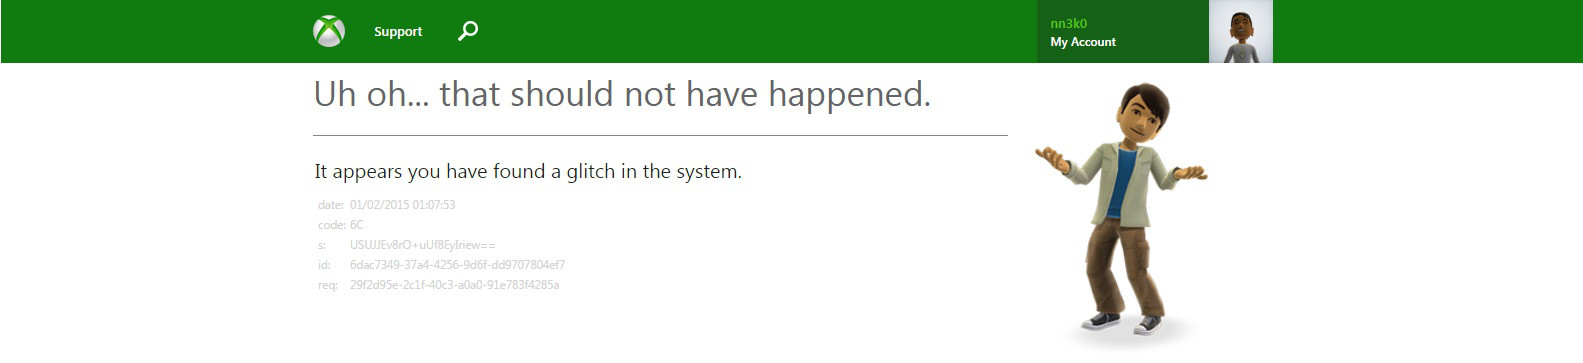 XBox Live Support is Uh Oh